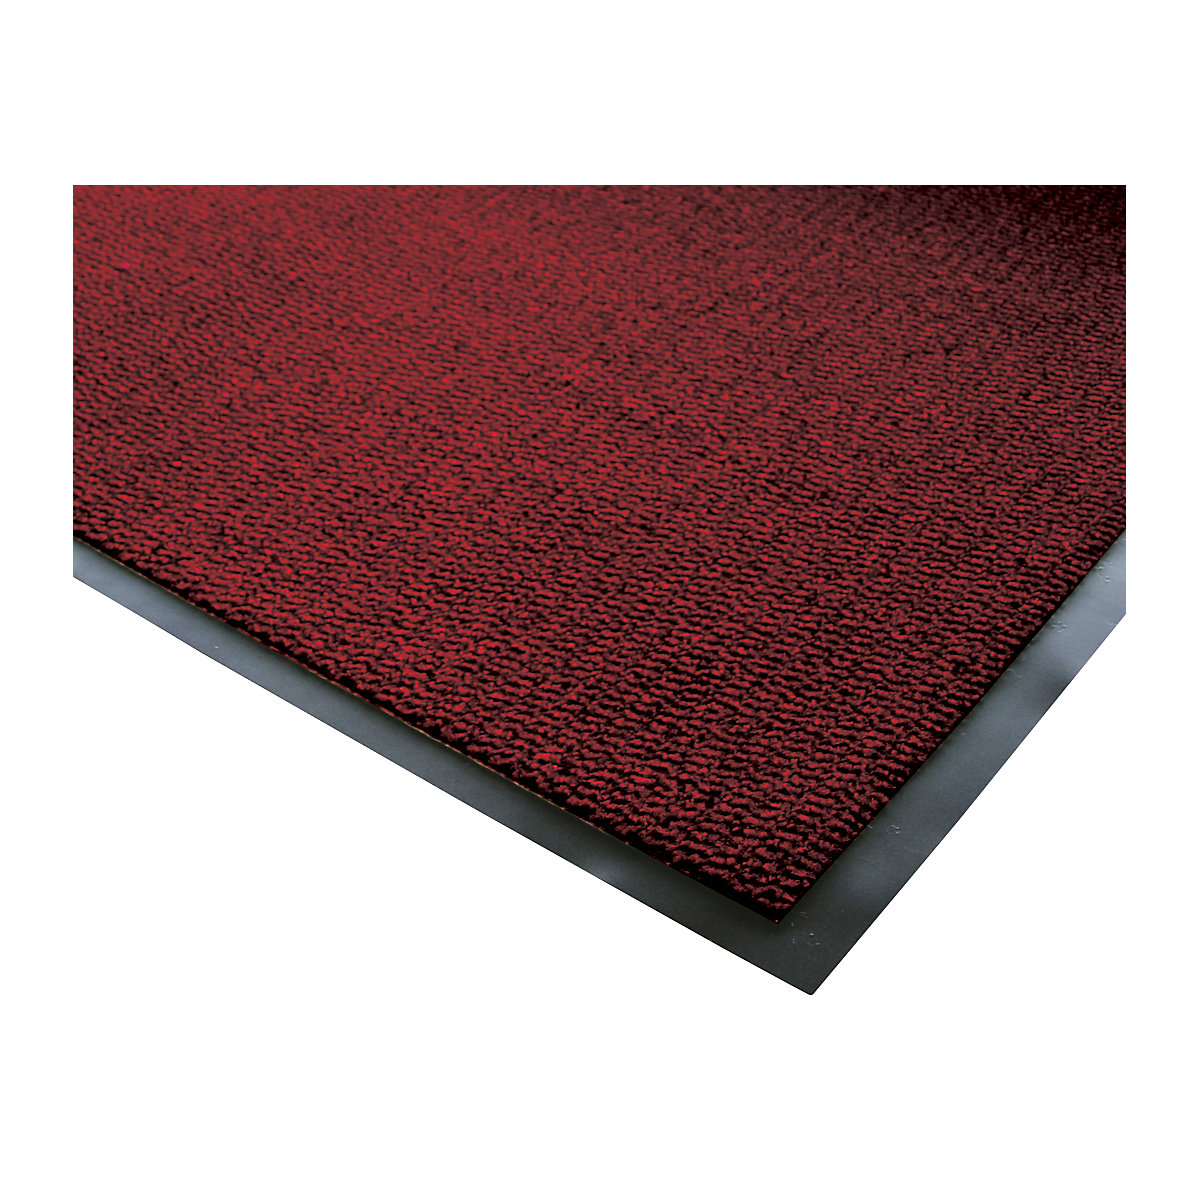 Entrance matting for indoor use, polypropylene pile, width 1200 mm, sold by the metre, black / red